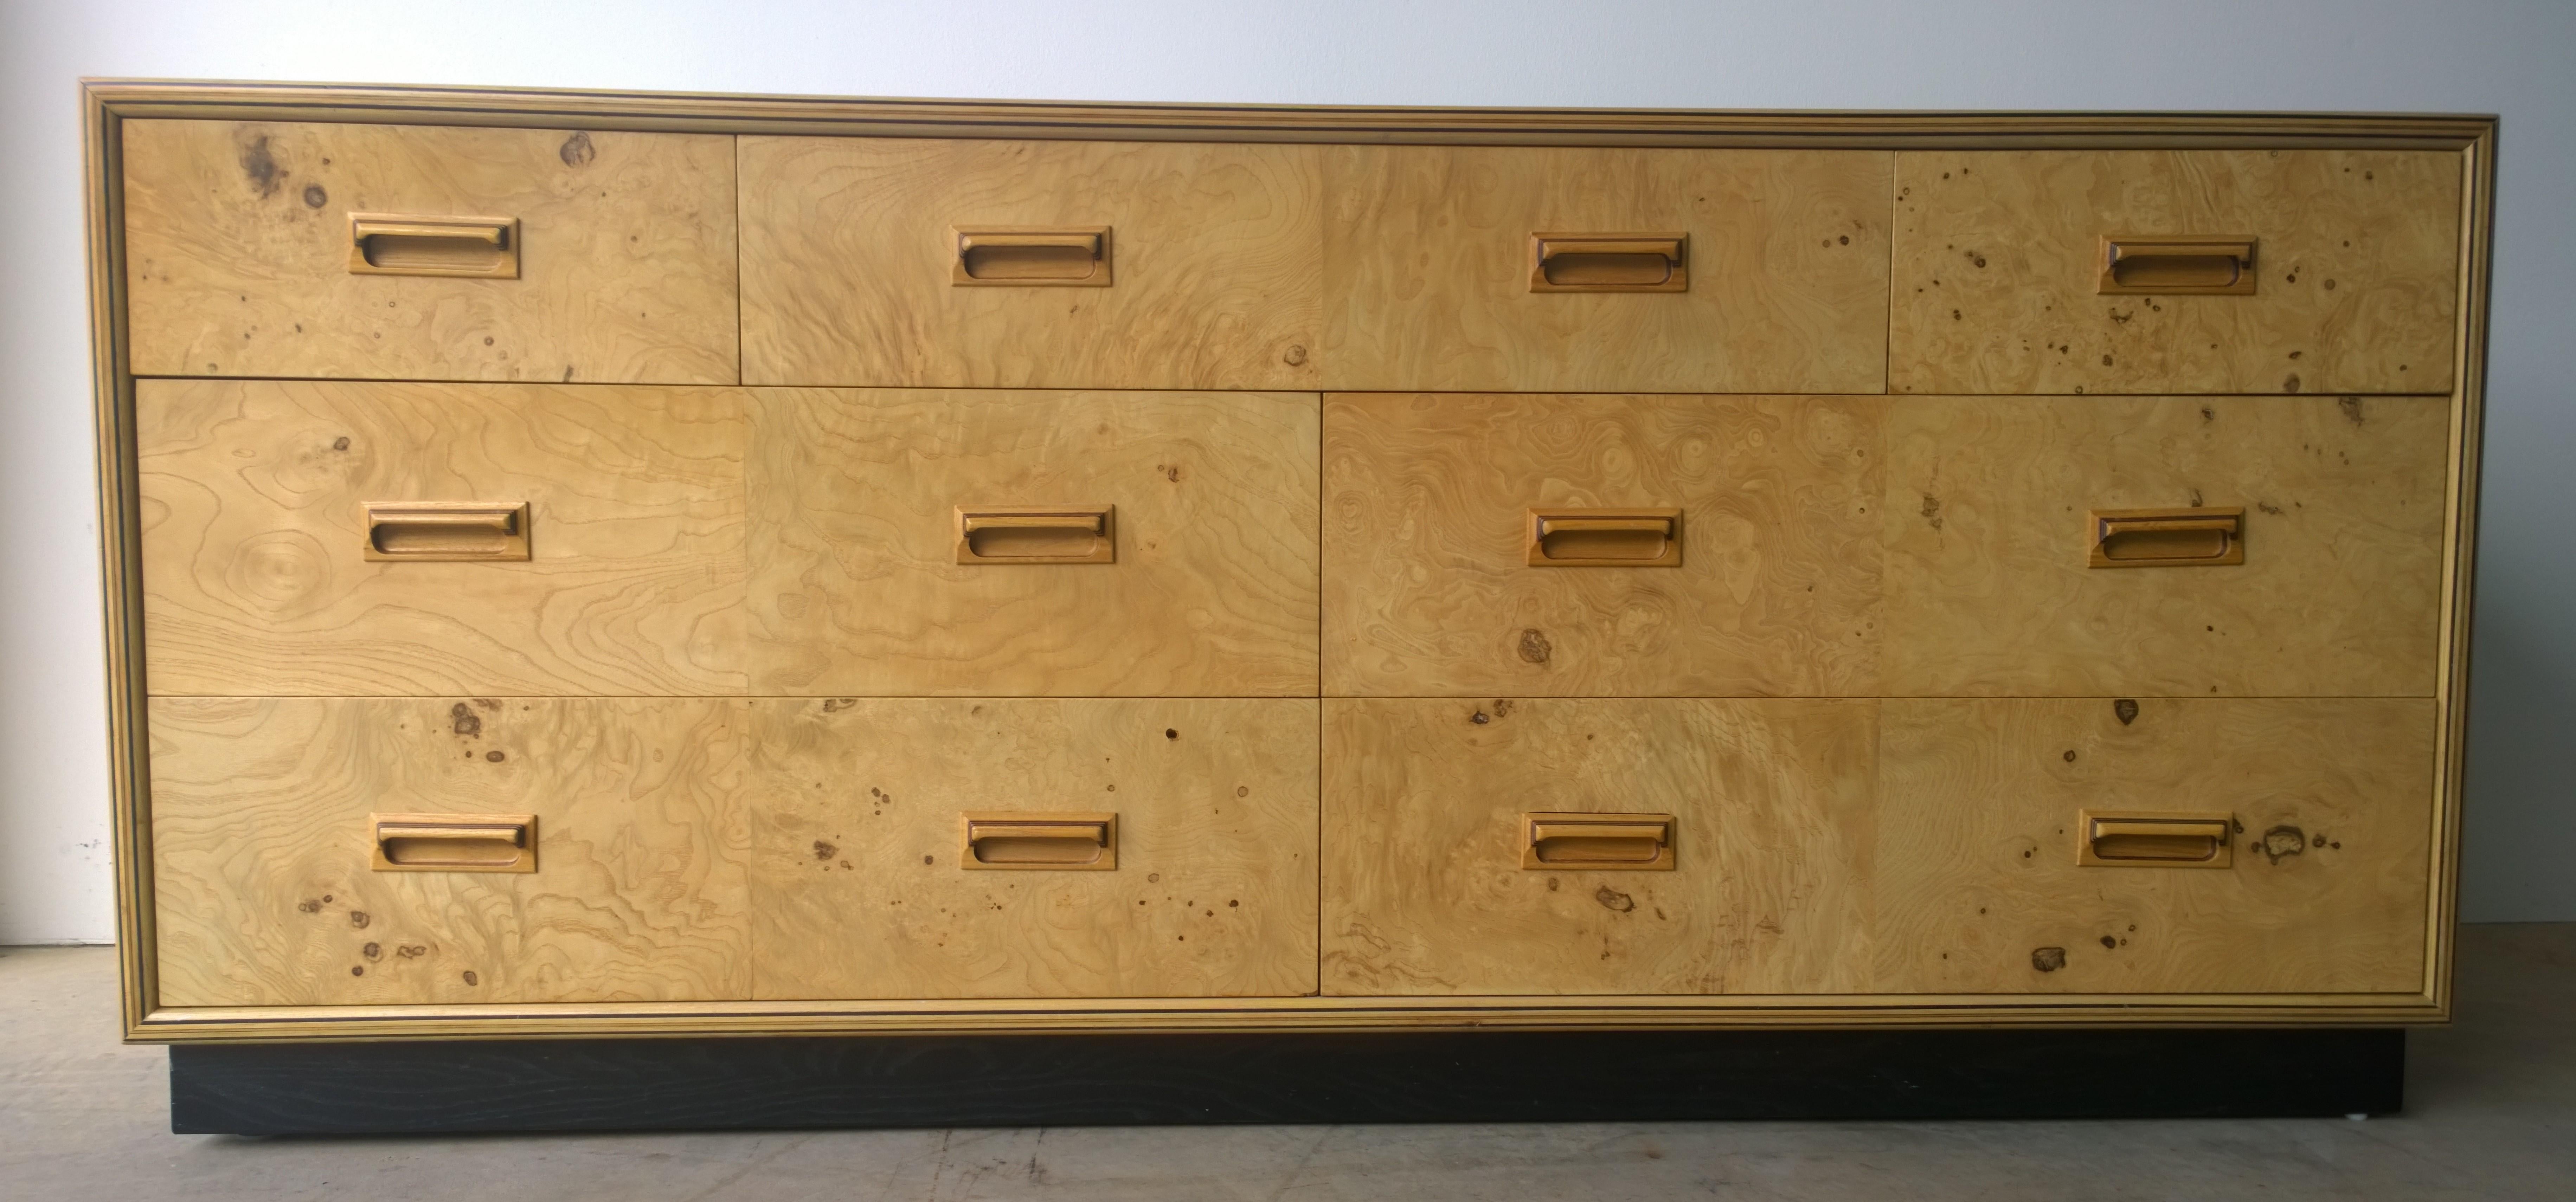 Henredon Dresser with an Oak Case, Burl Olive Drawers and Macassar Ebony Inlays For Sale 5